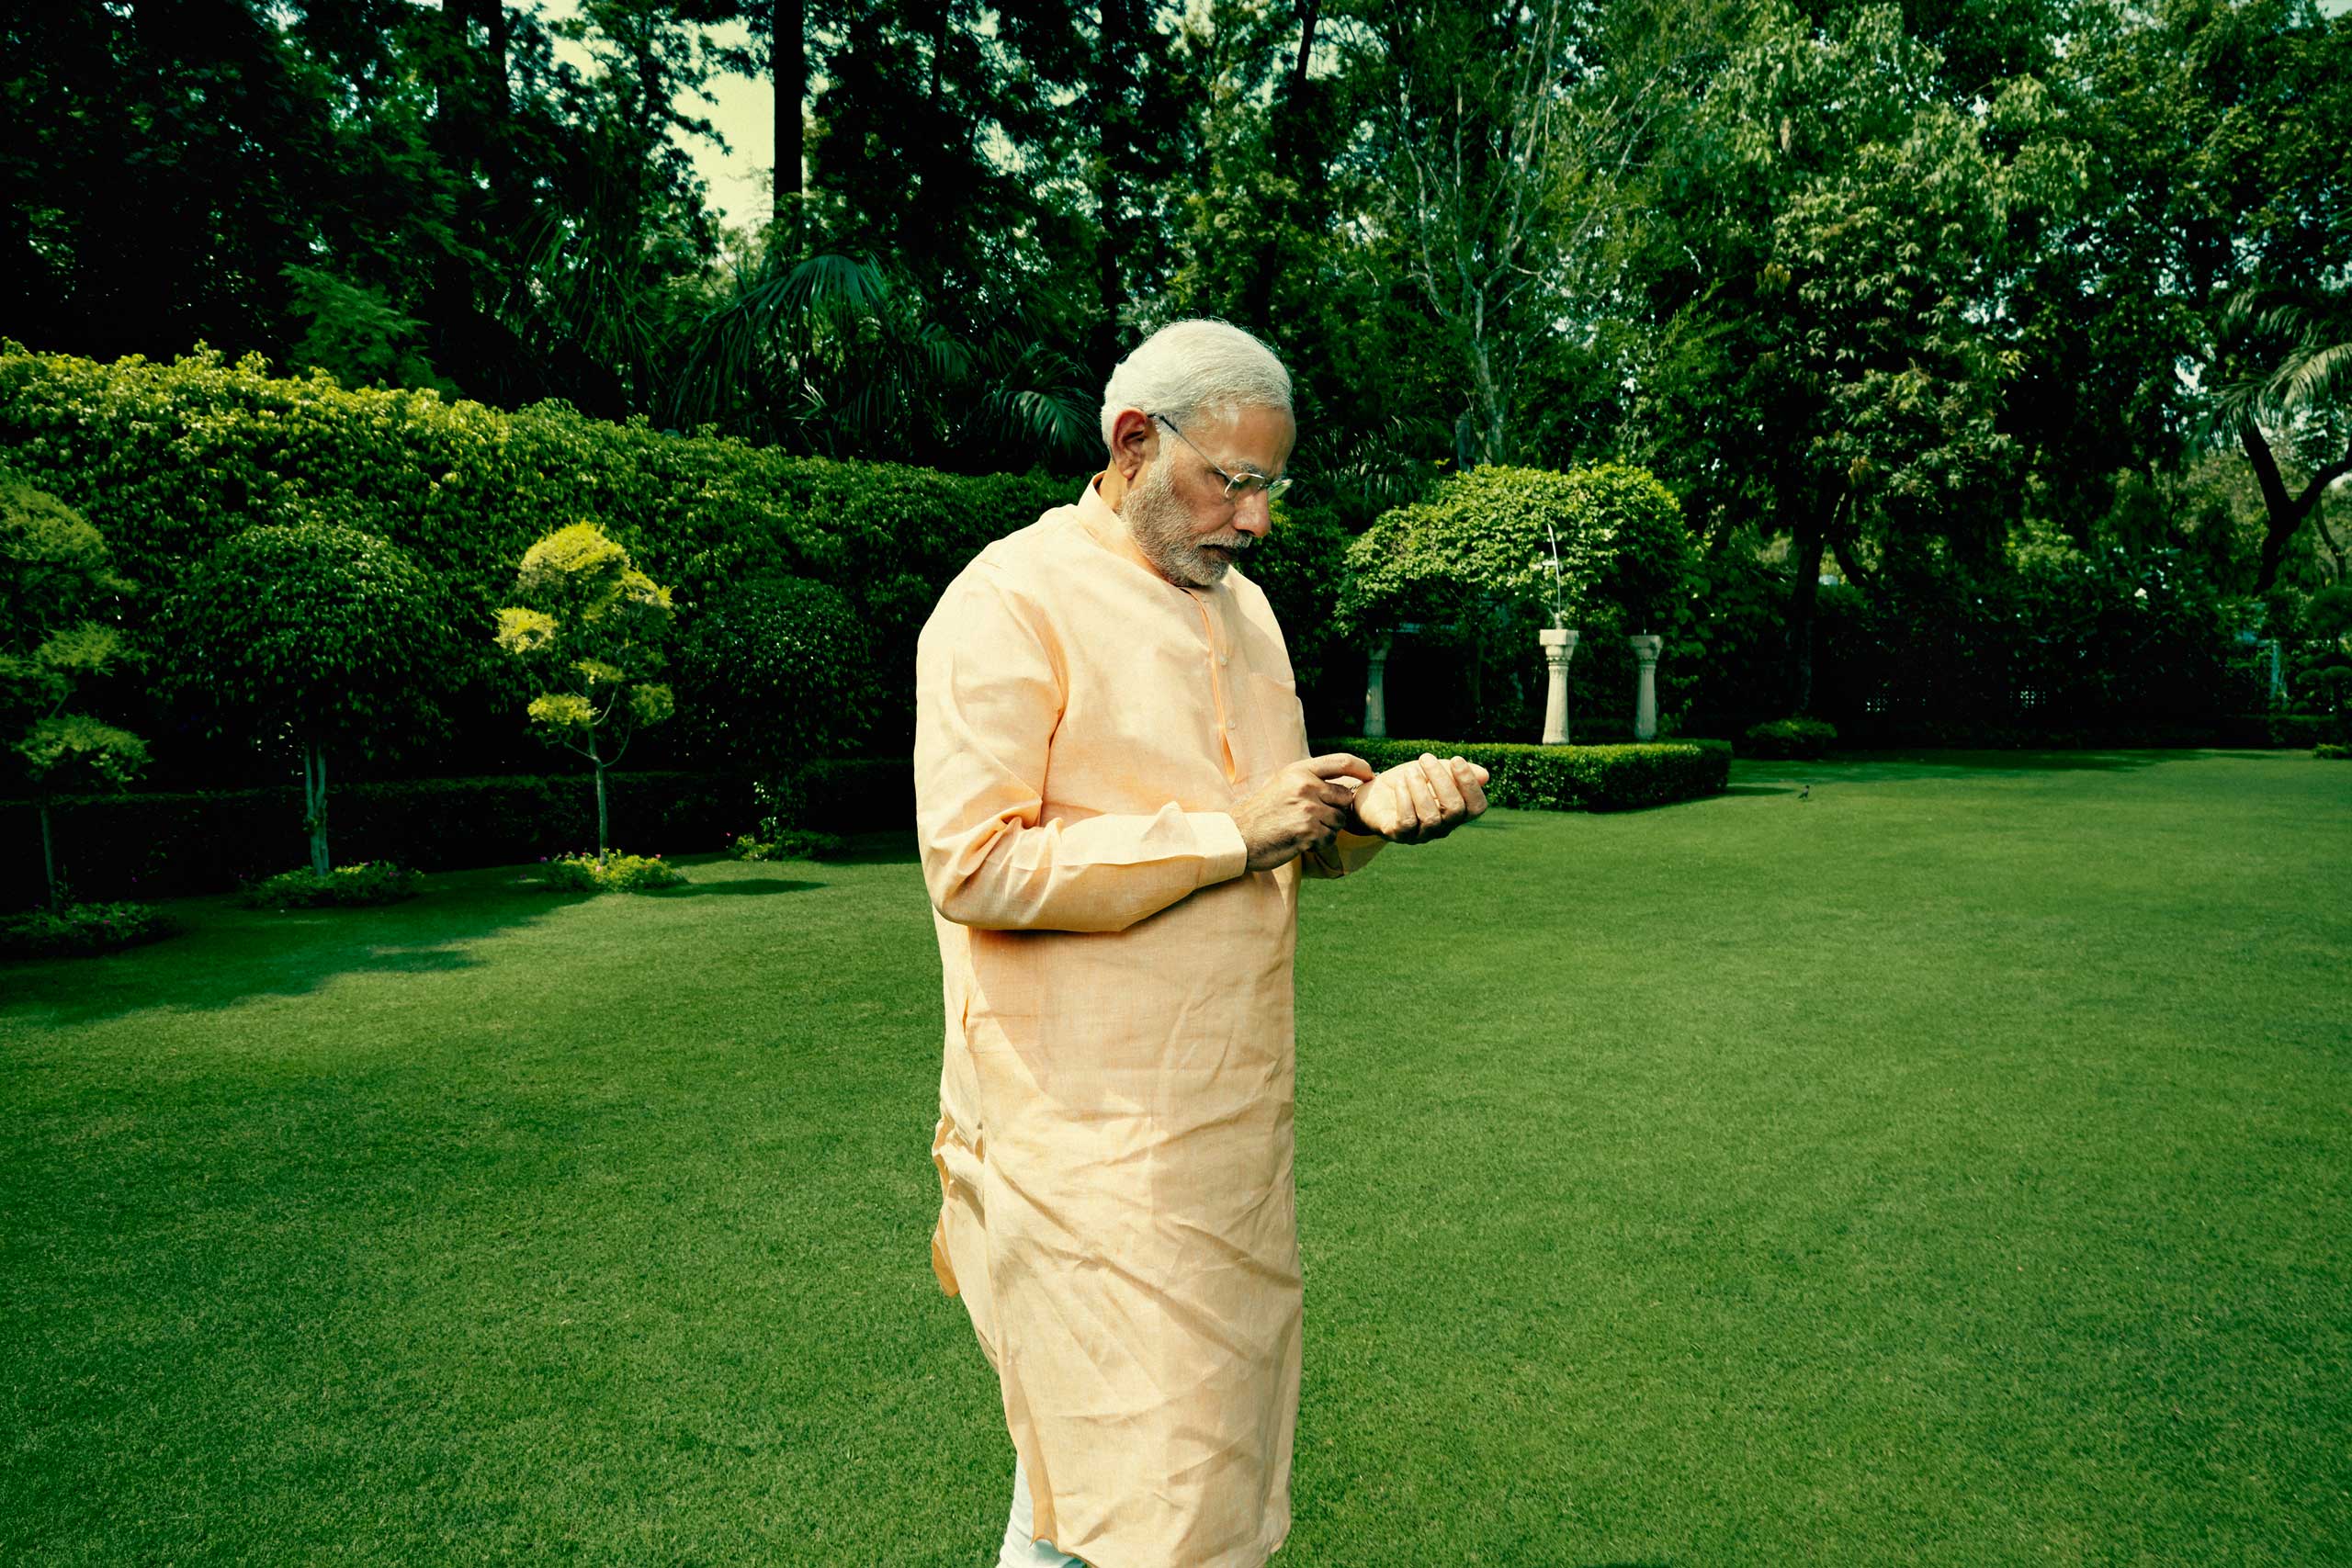 Indian Prime Minister Narendra Modi in the garden at his official residence in New Delhi, India. May 2, 2015.